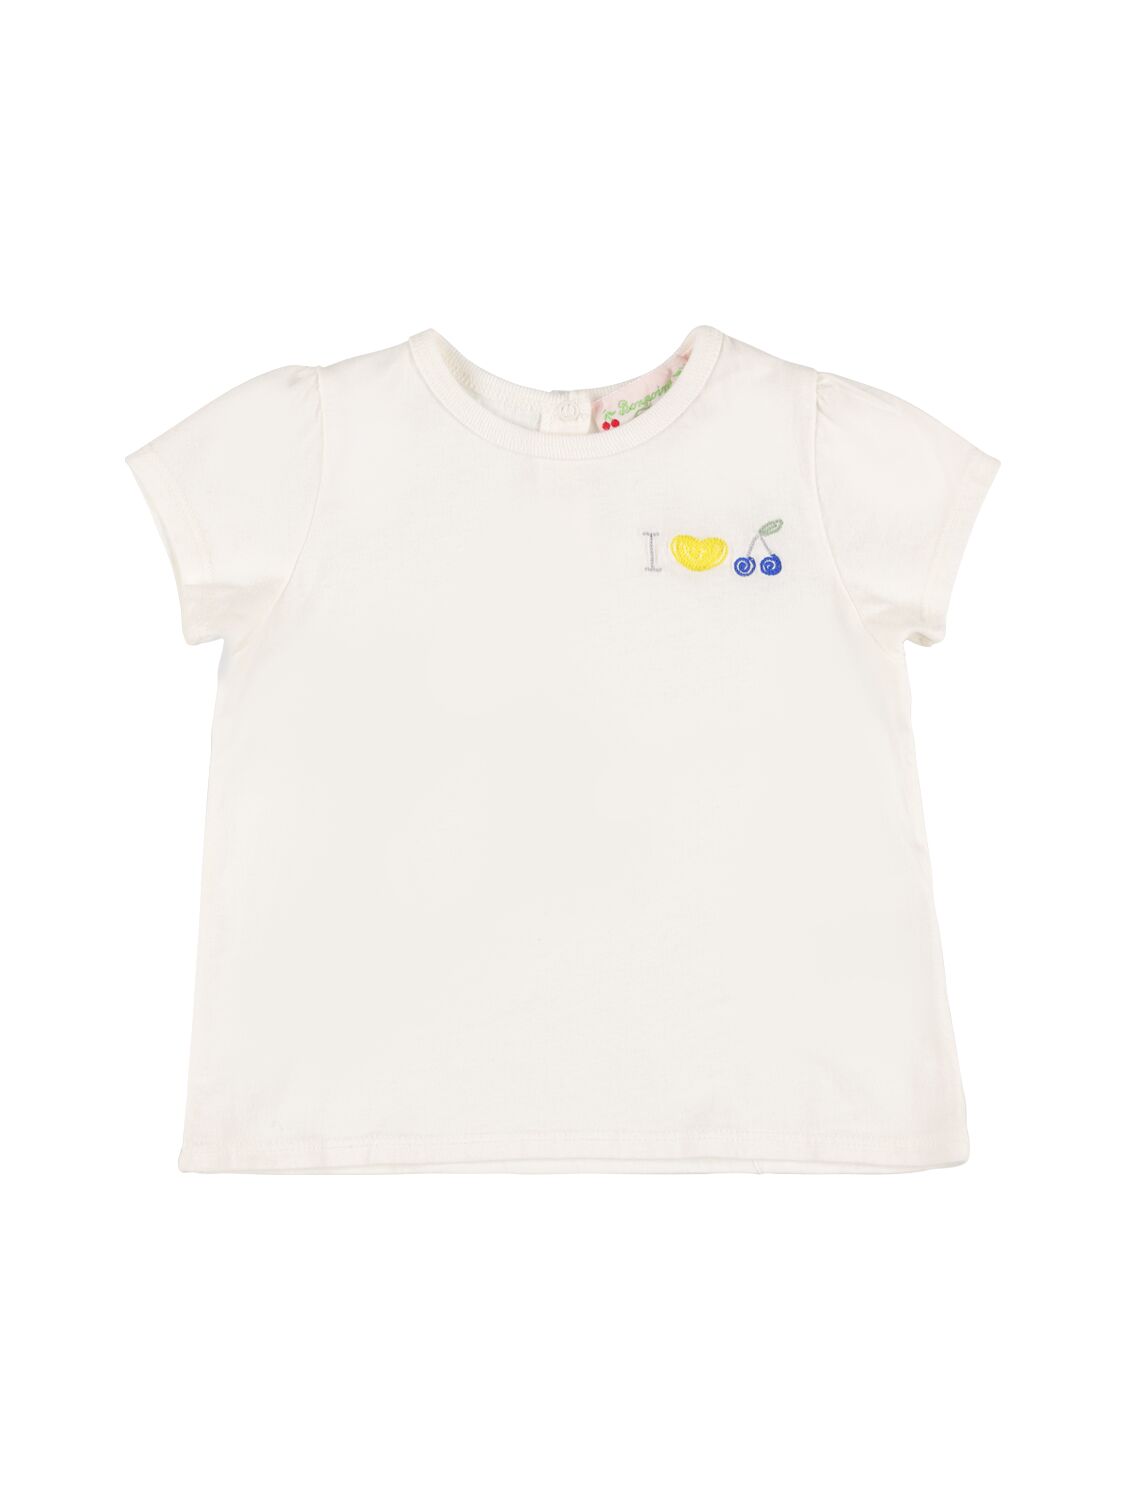 Bonpoint Kids' Embroidered Cotton Jersey T-shirt In White